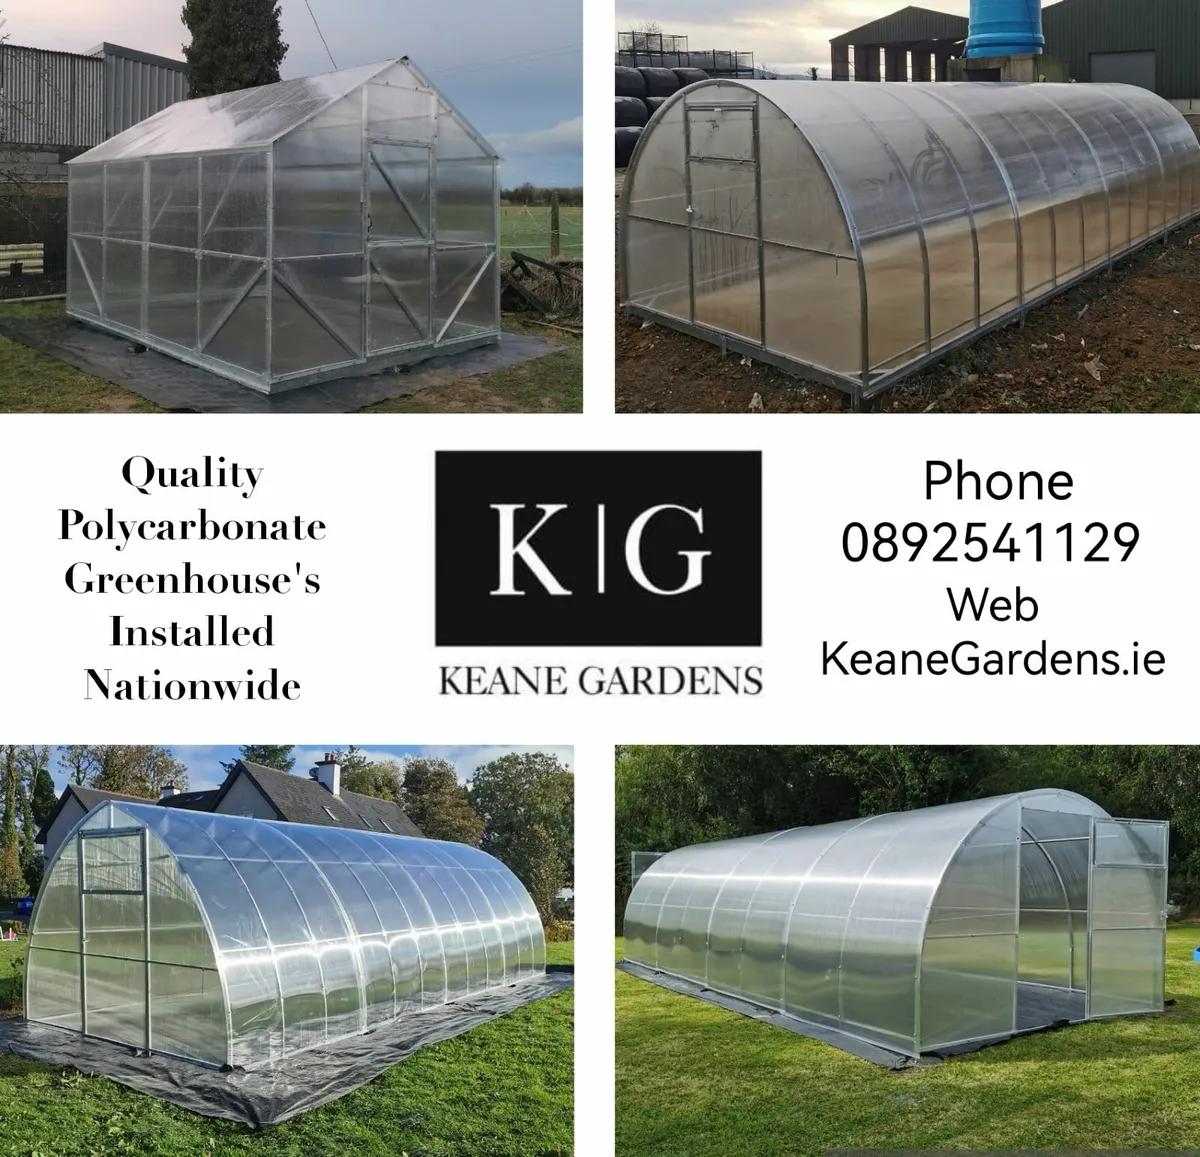 Polycarbonate Greenhouses